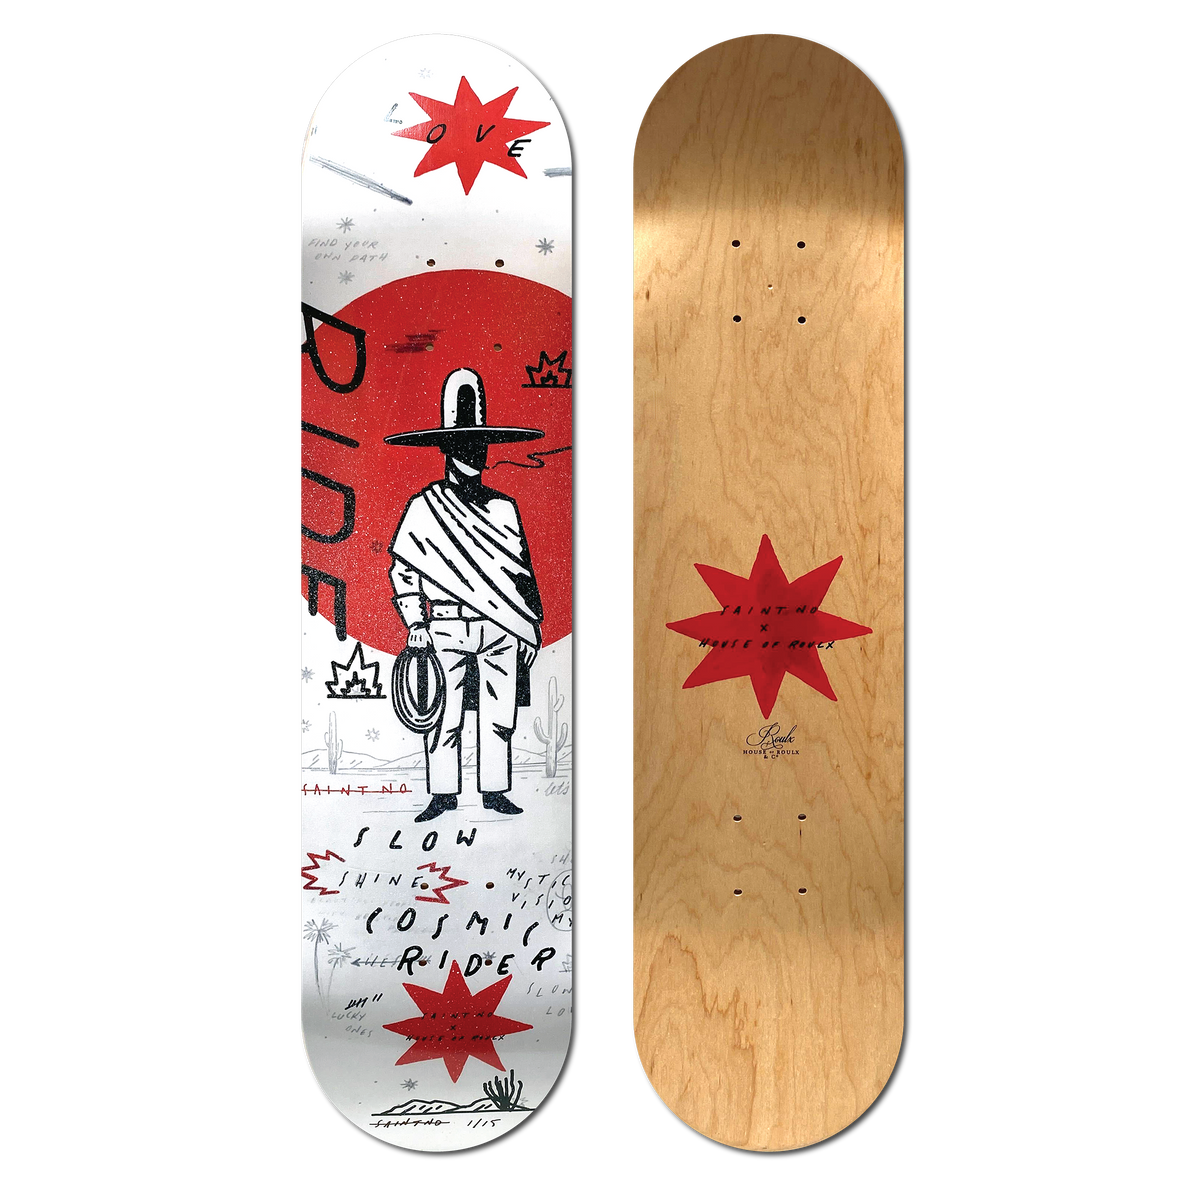 SAINT NO &quot;Cosmic Rider: Side B&quot; - Skate Deck, Hand-Embellished Edition of 15